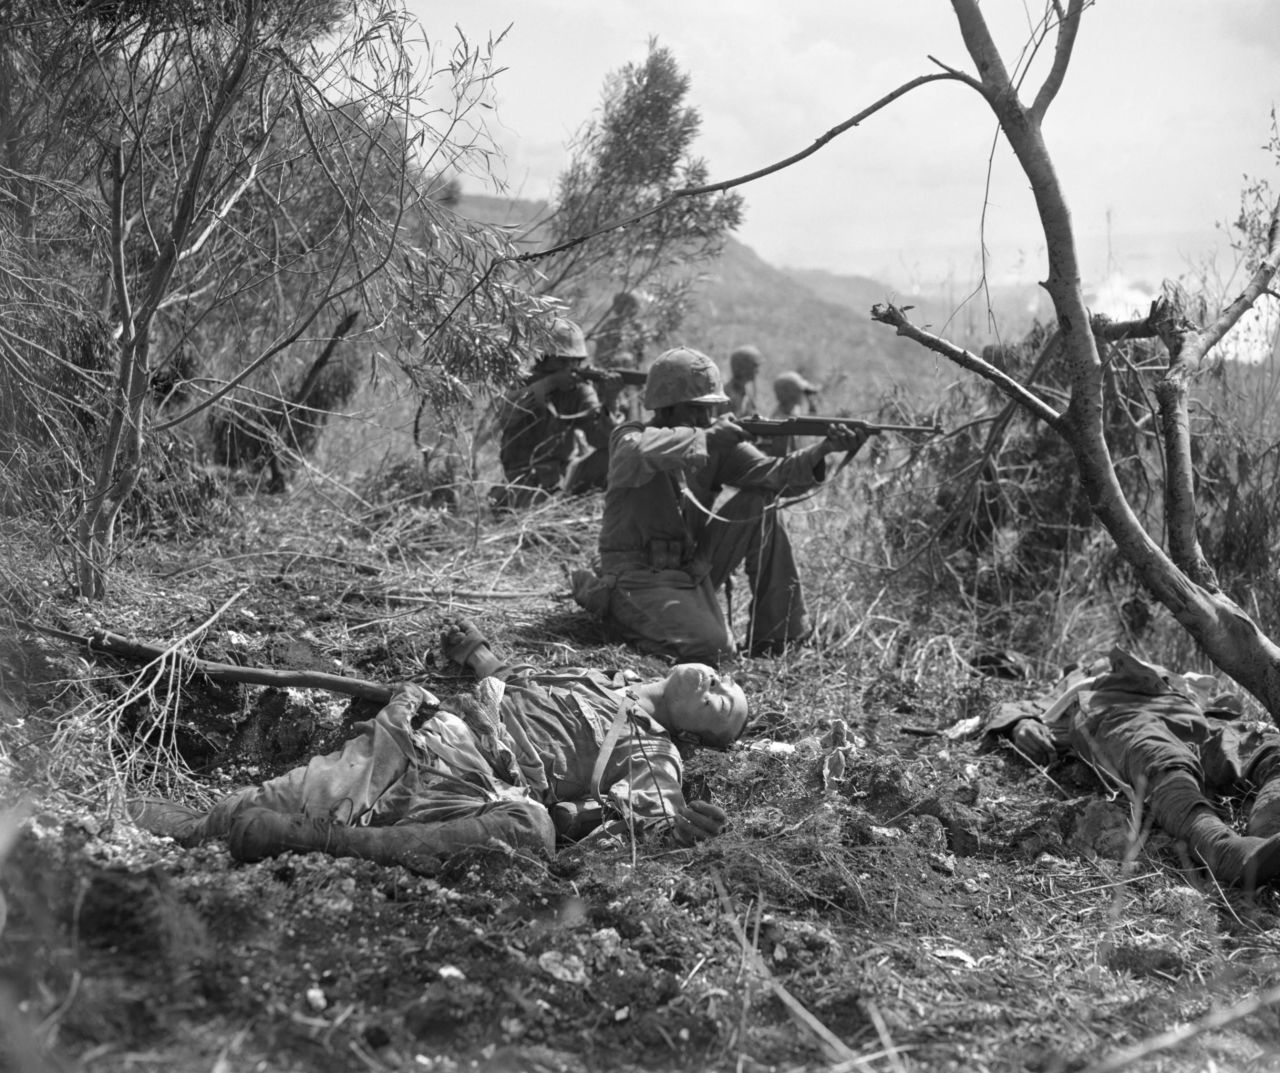 With dead Japanese soldiers nearby, Marines aim at the enemy during the US invasion of Saipan.